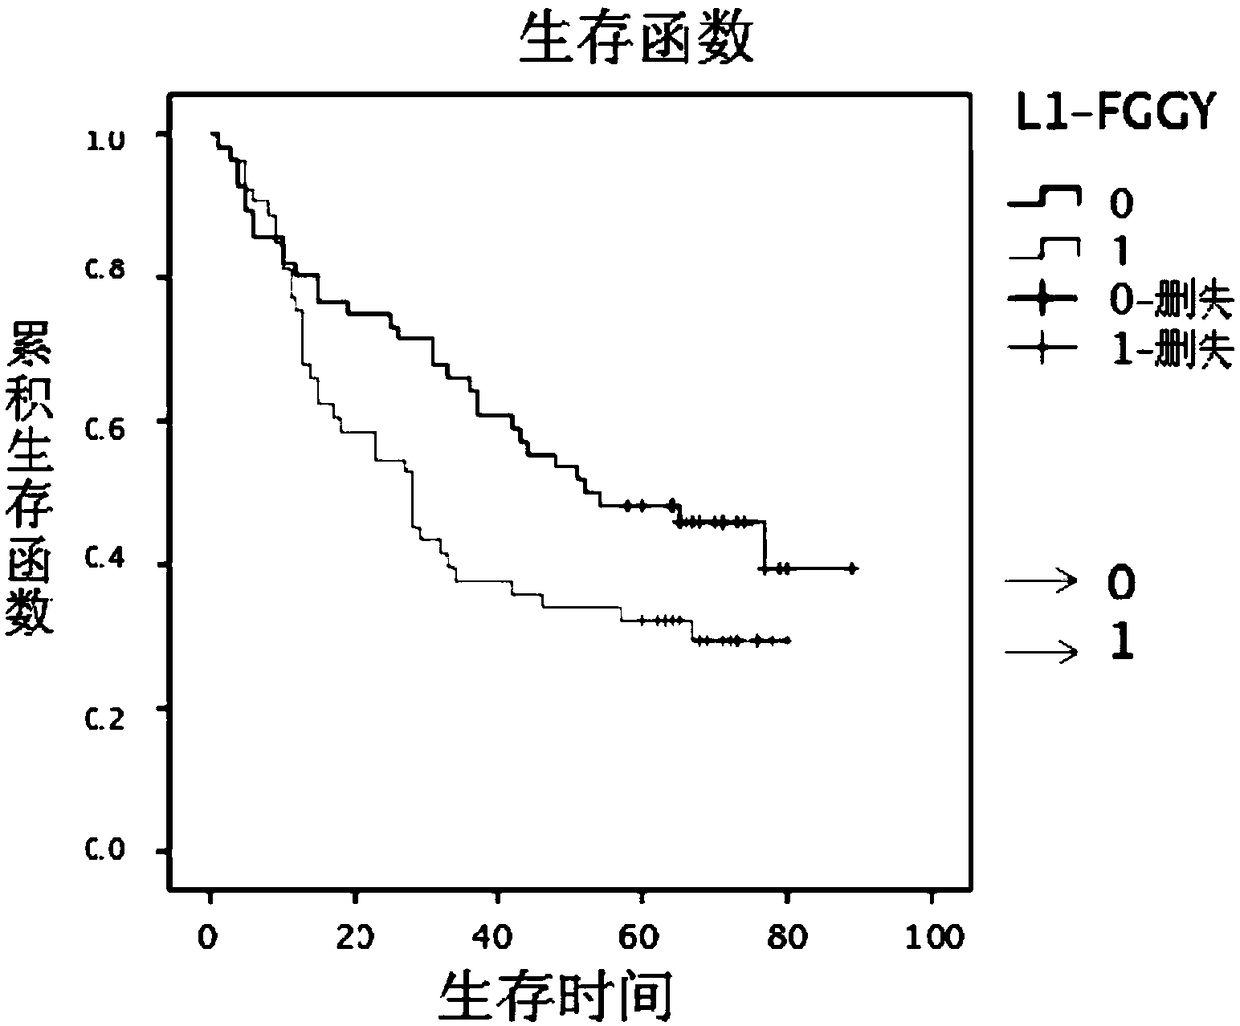 Retrotransposition gene L1-FGGY and application thereof as marker of lung squamous cell carcinoma